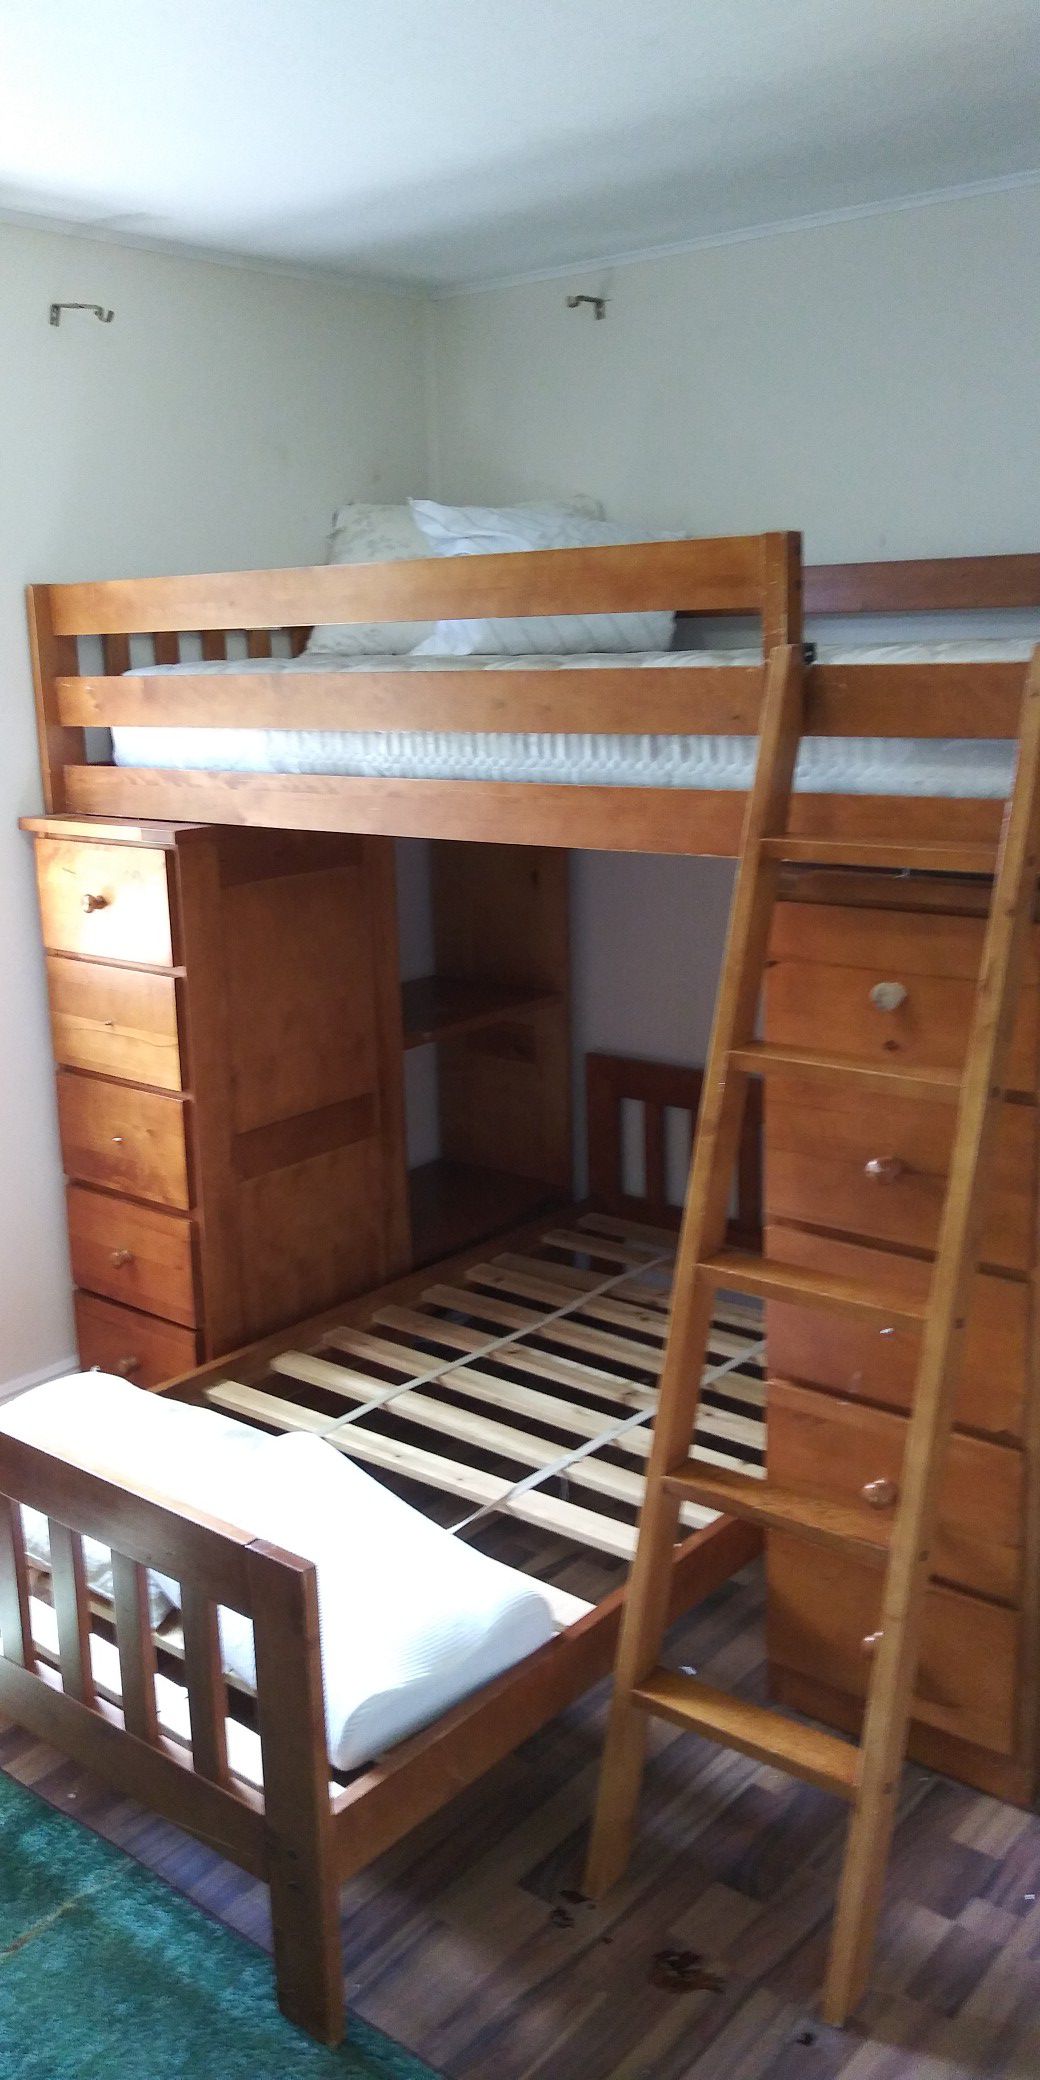 !! Nice big Bunk Bed for your Kids with matress & Dresser!!